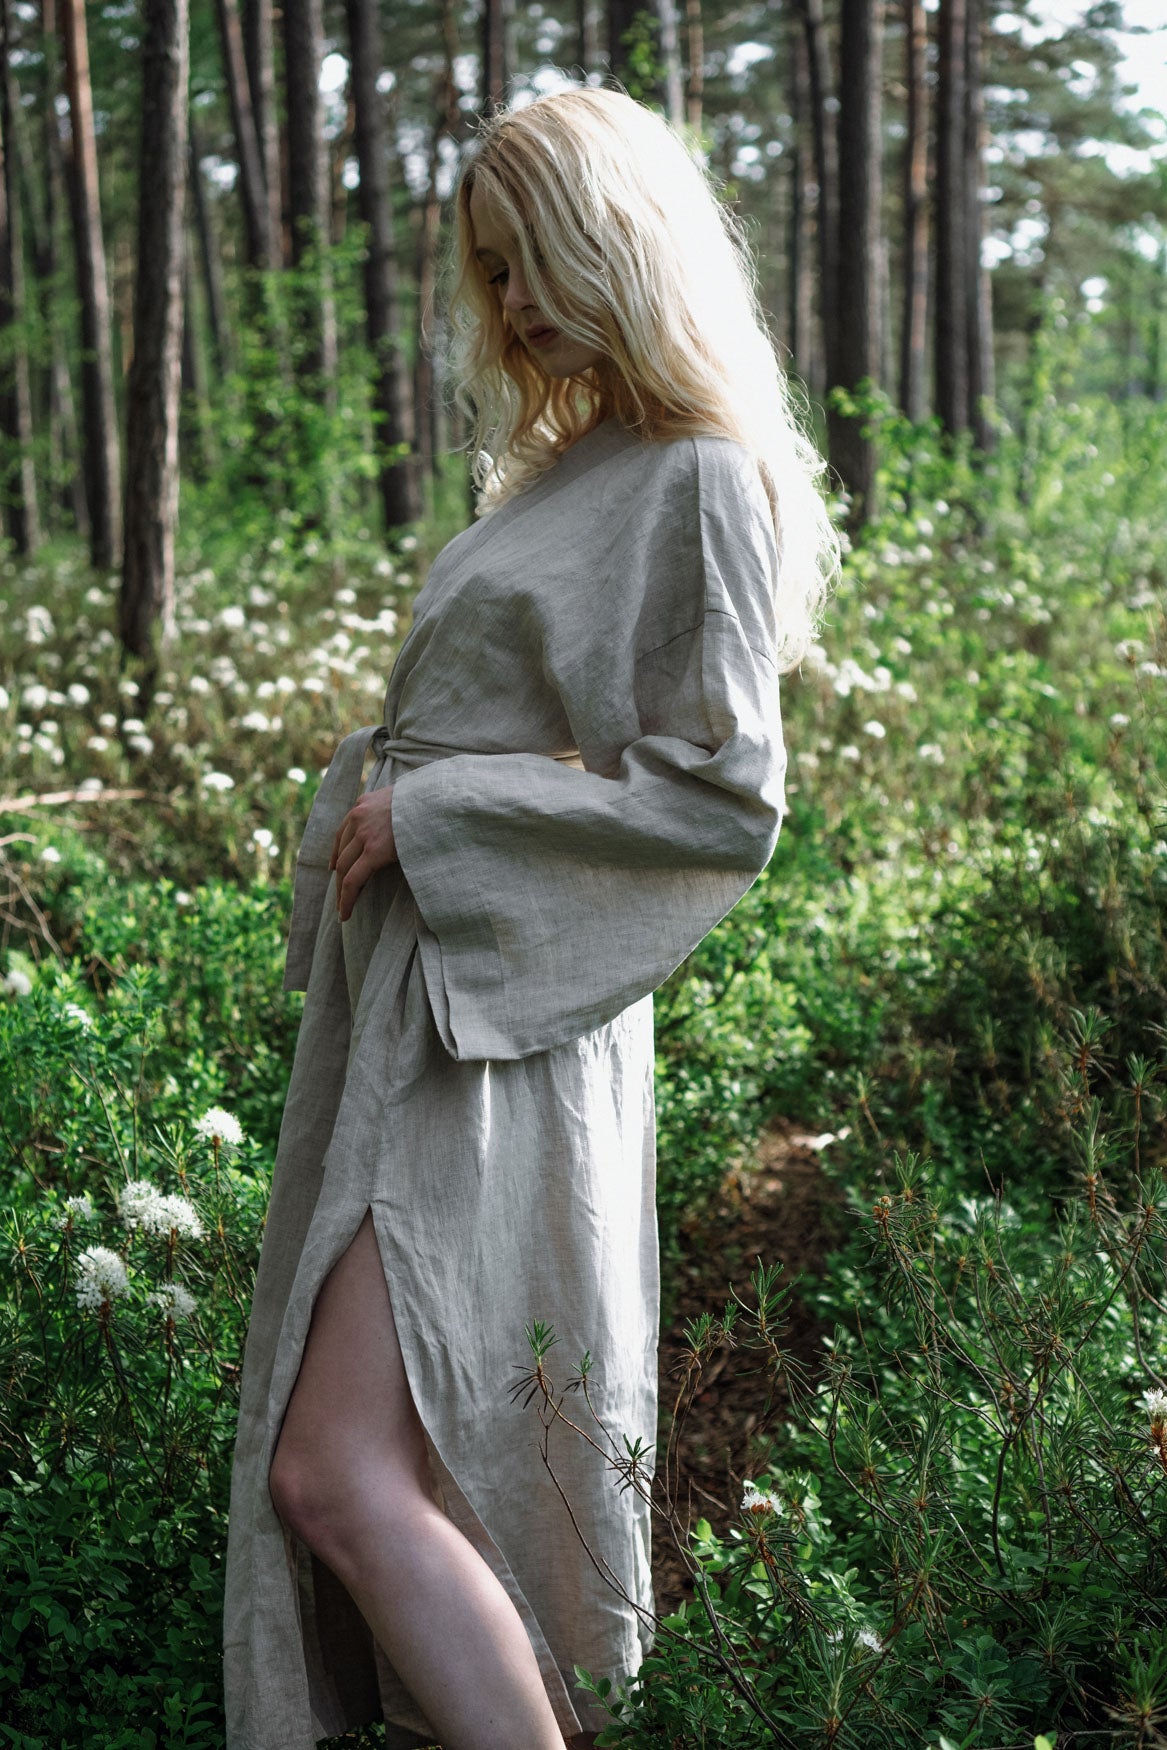 Organic, sustainable and sexy at the same time! Agasåga long beige kimono with splits, long sleeves and belt. Below knee length bathrobe. This robe is natural, soft, breathable and pure. It’s a conscious and healthy choice for your body and environment that embraces genuine selflove and selfcare. Handmade with love in the North.